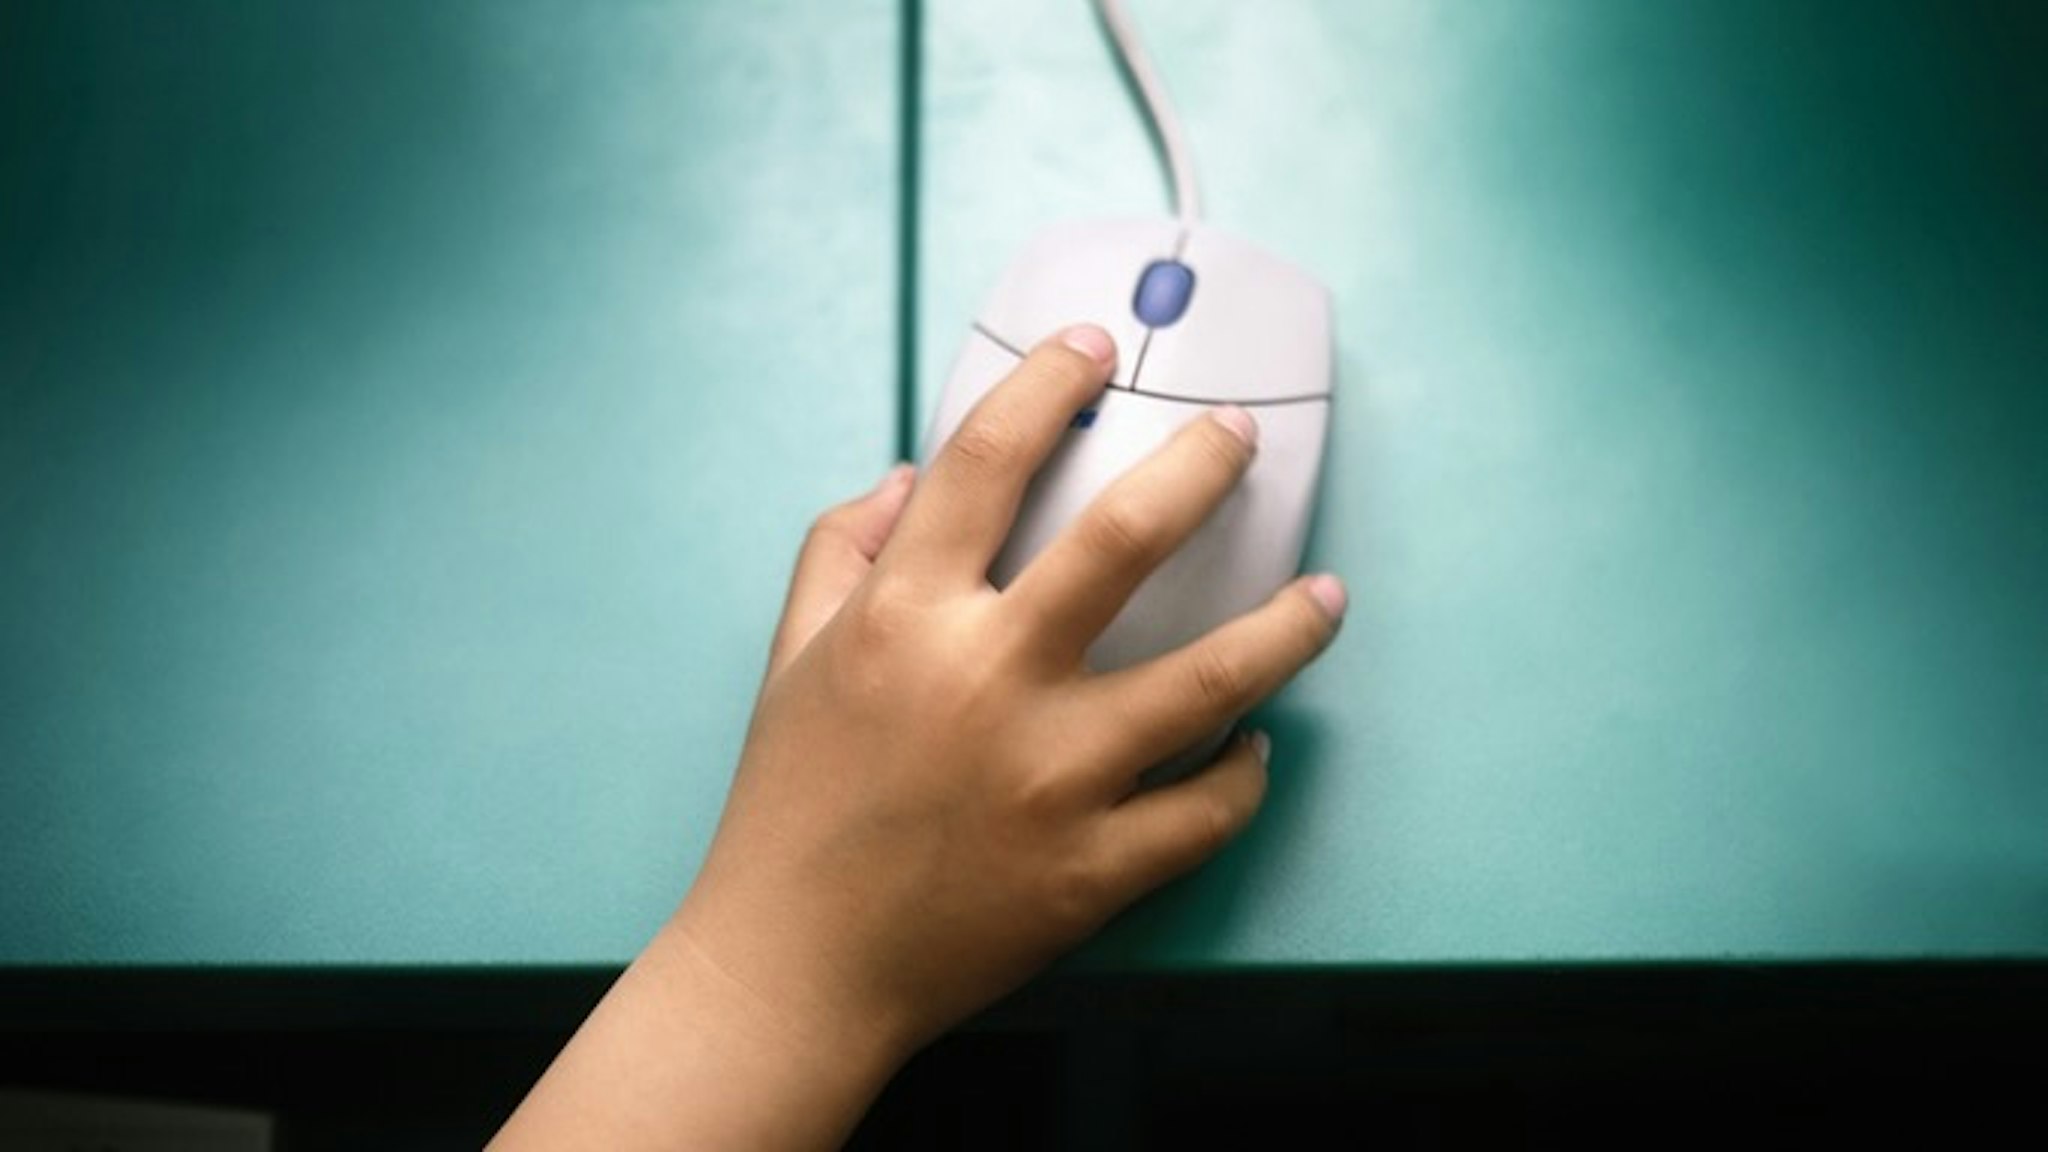 Child's Hand on Computer Mouse - stock photo